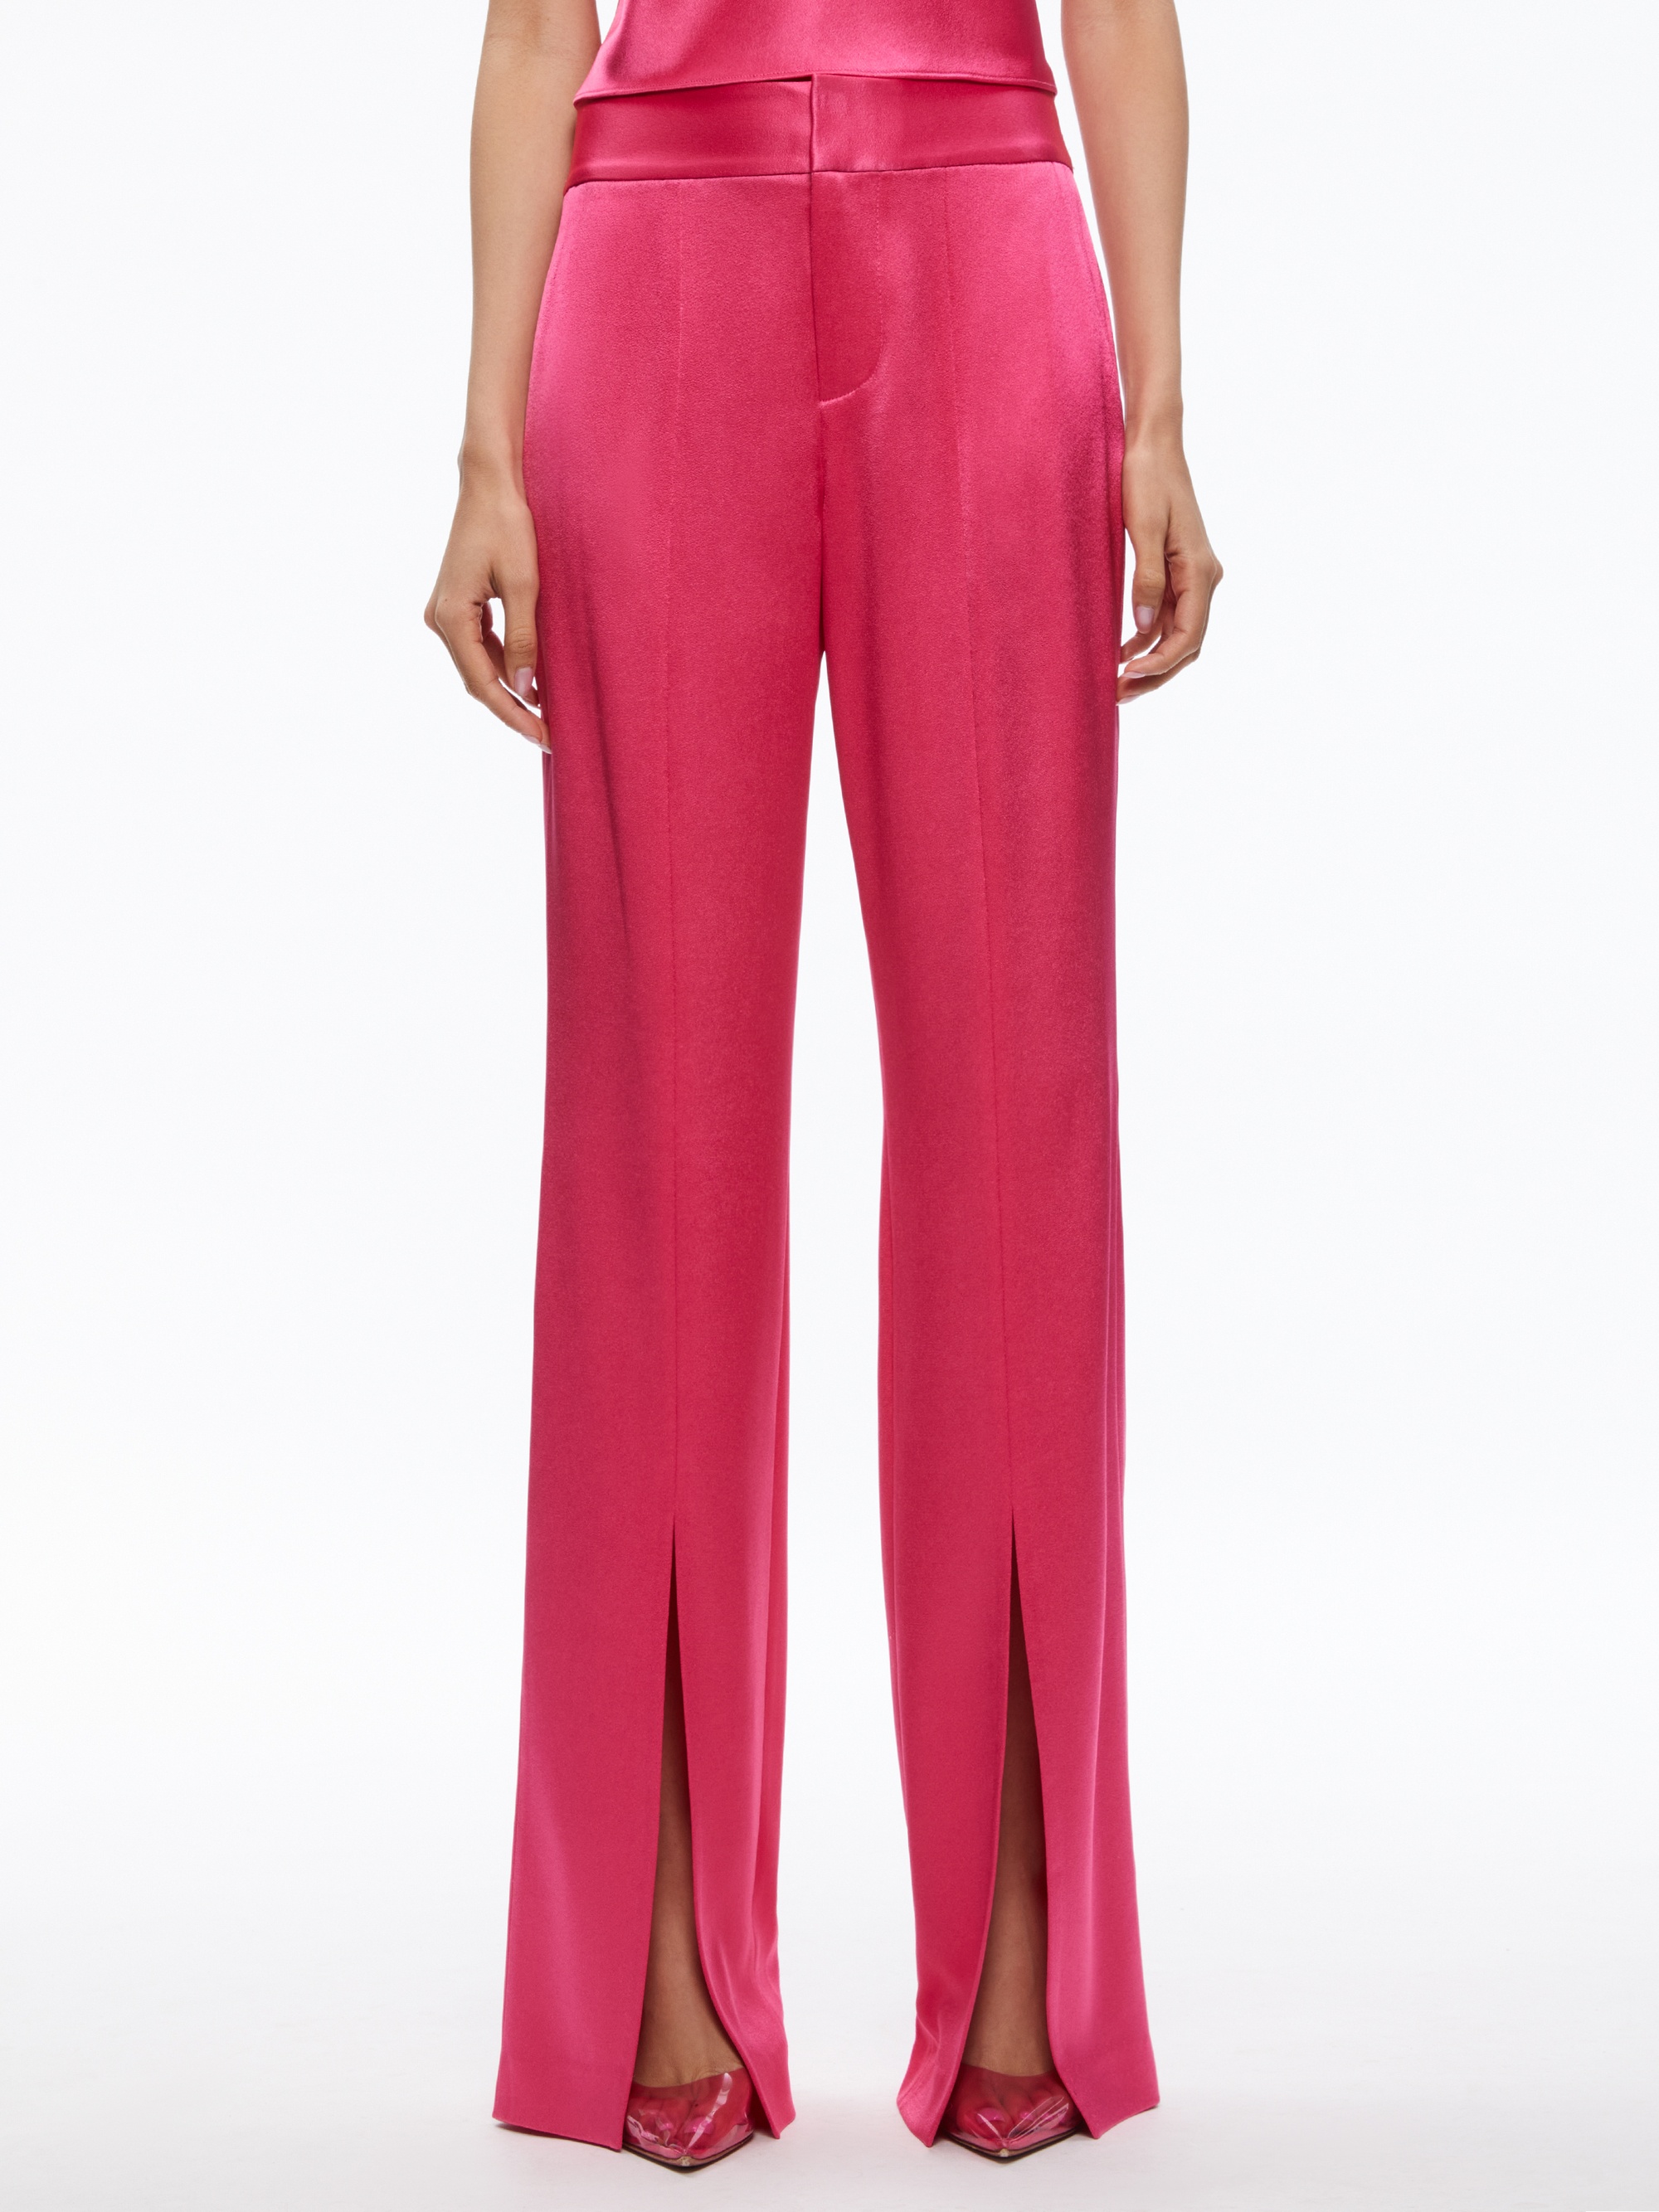 JODY HIGH WAISTED FRONT SLIT PANT - 2